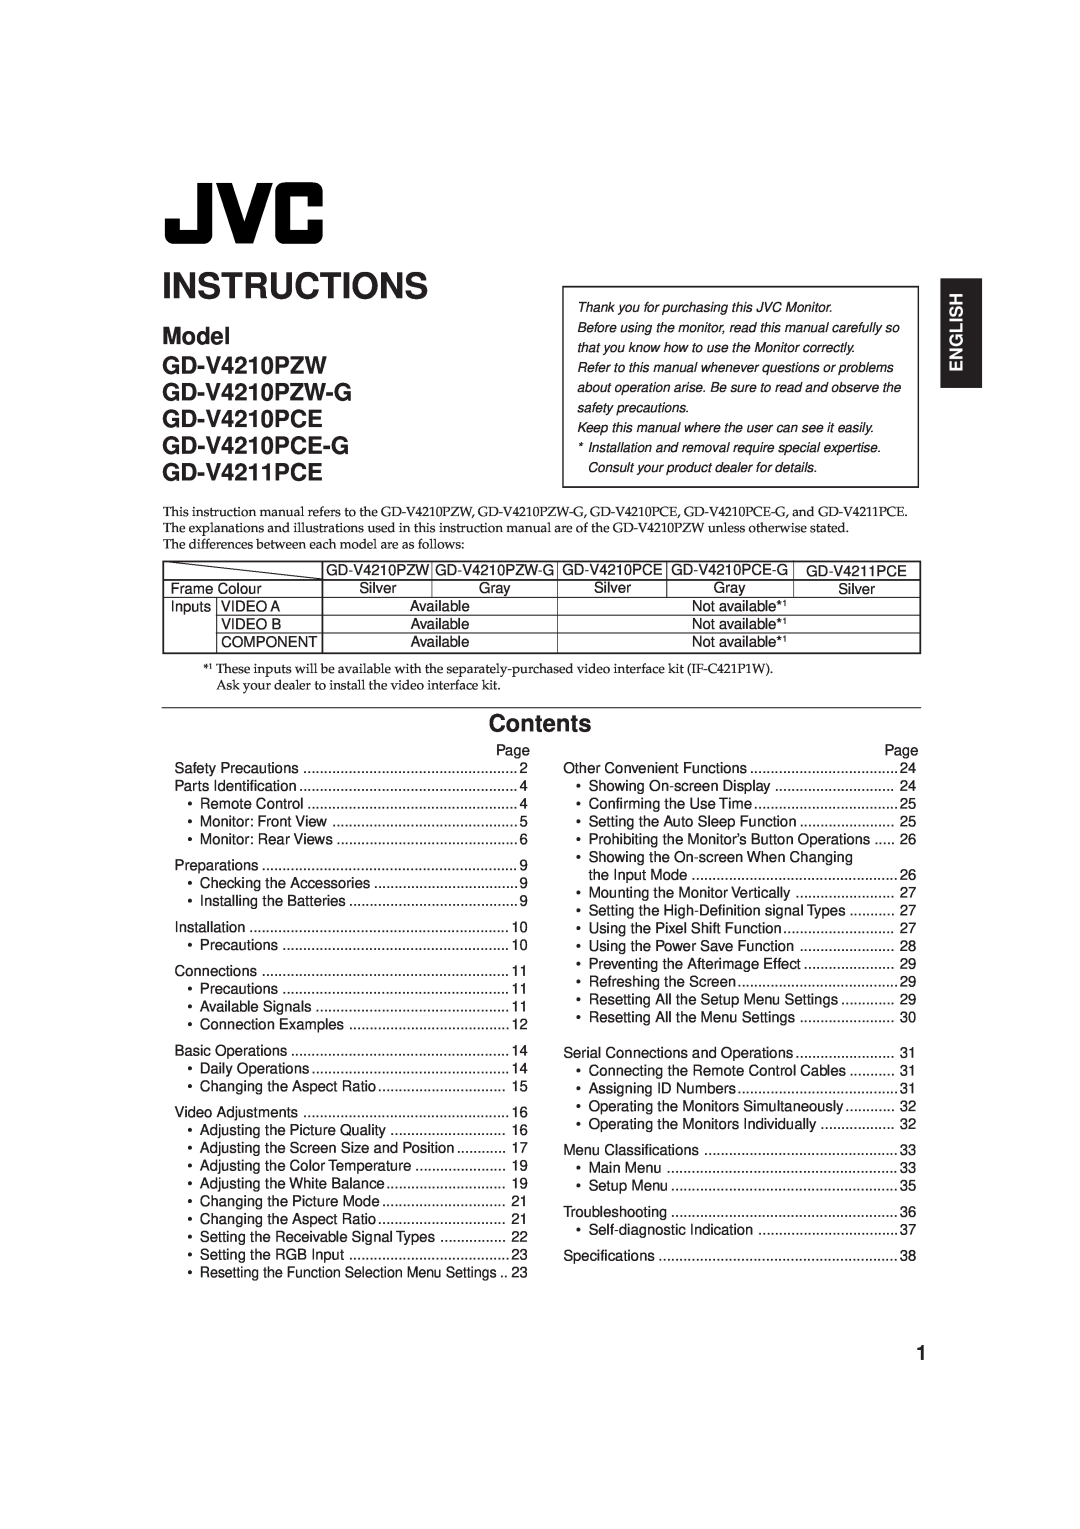 JVC GD-V4210PCE-G, GD-V4211PCE, GD-V4210PZW-G instruction manual Instructions, English, Contents 